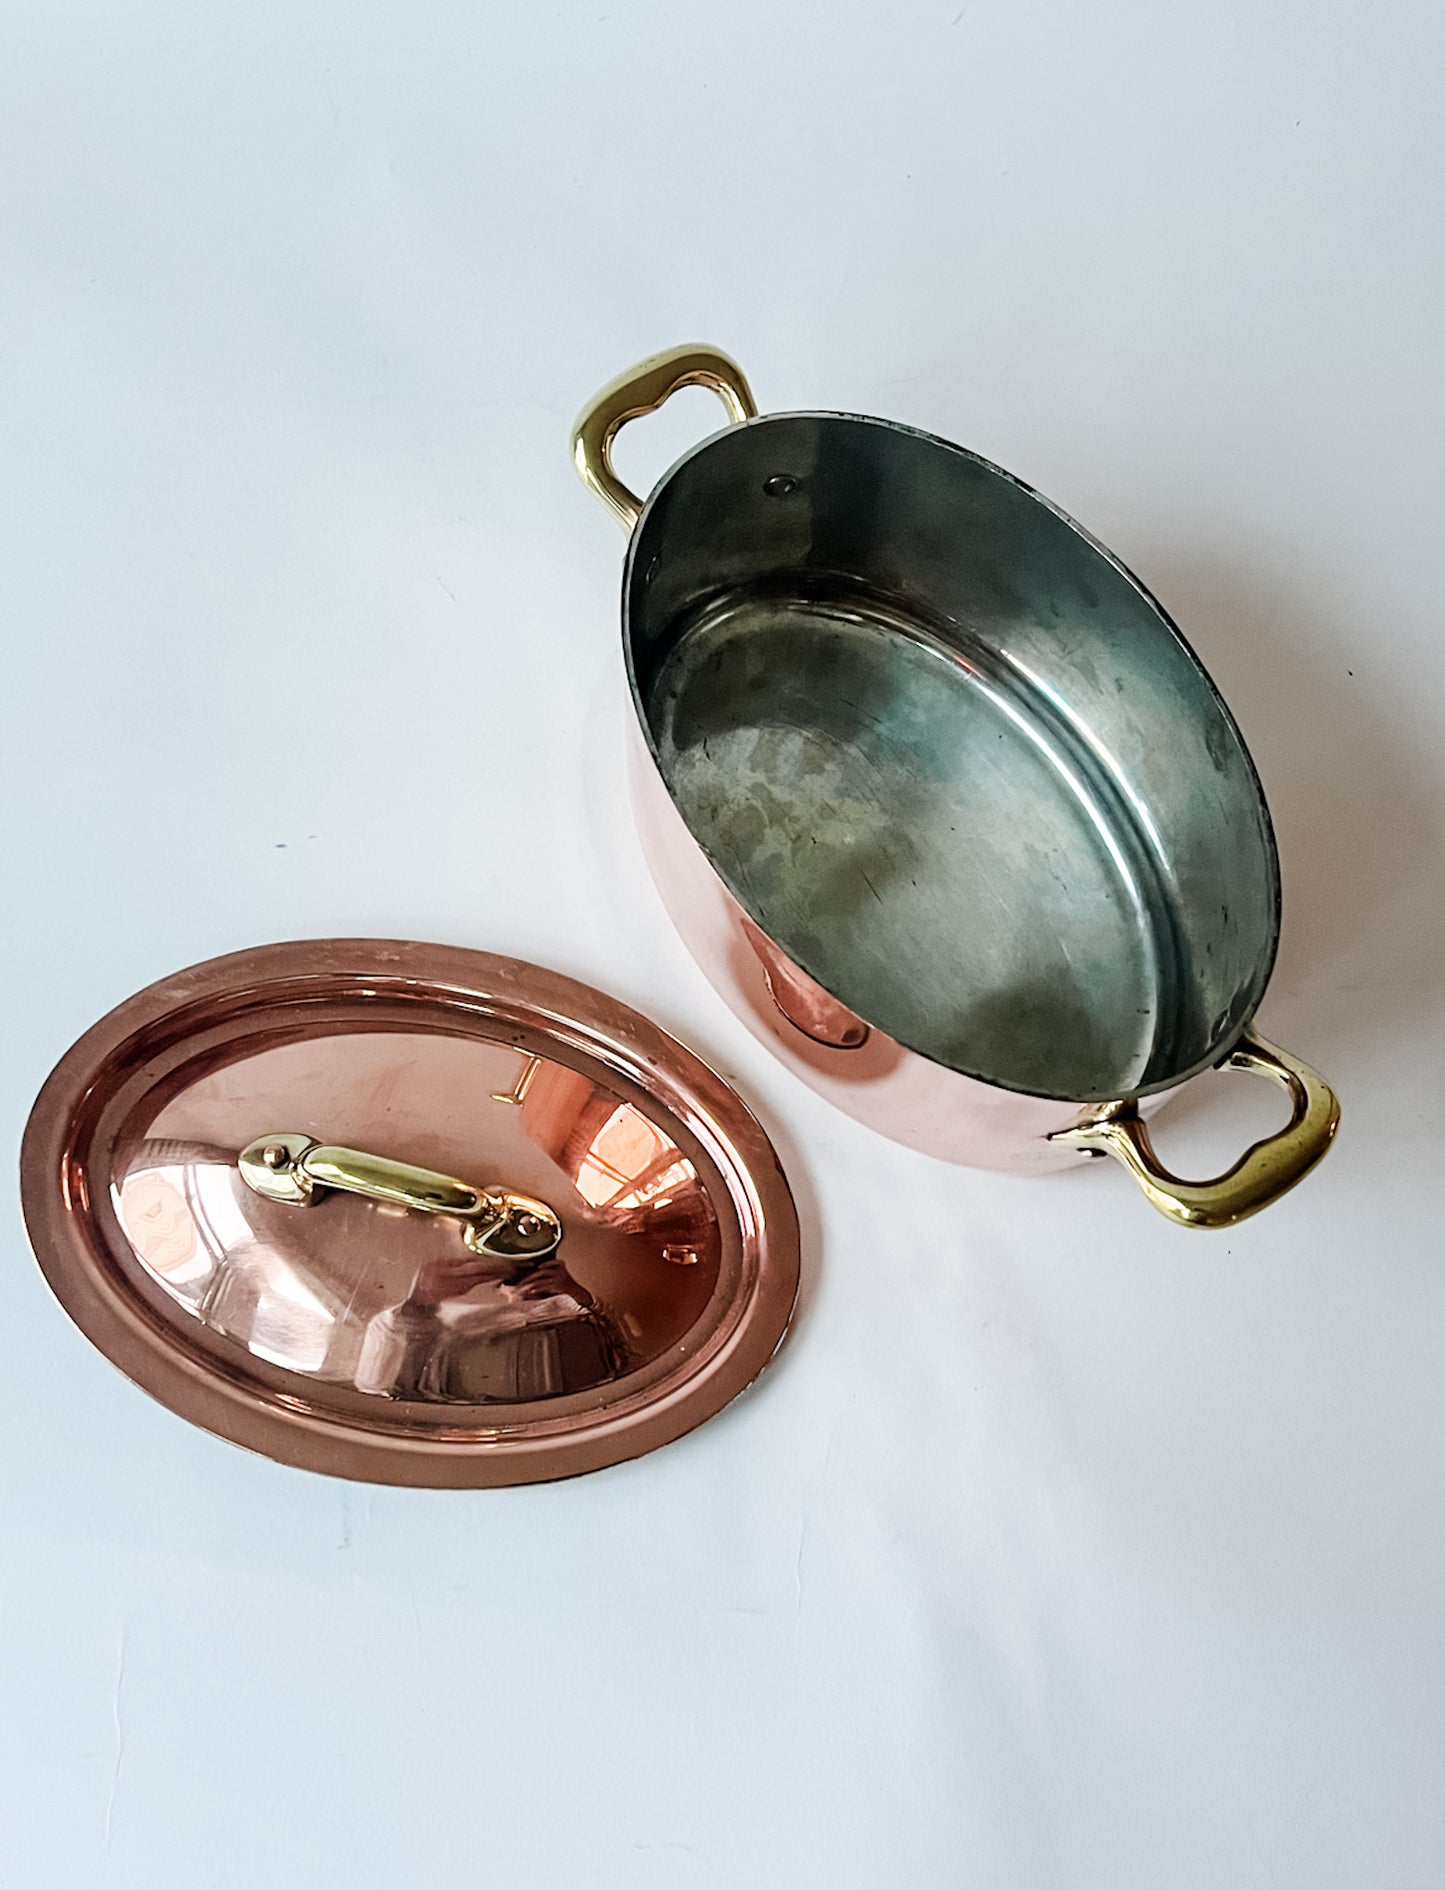 Oval Copper Pan With Brass Handles and Copper Rivets